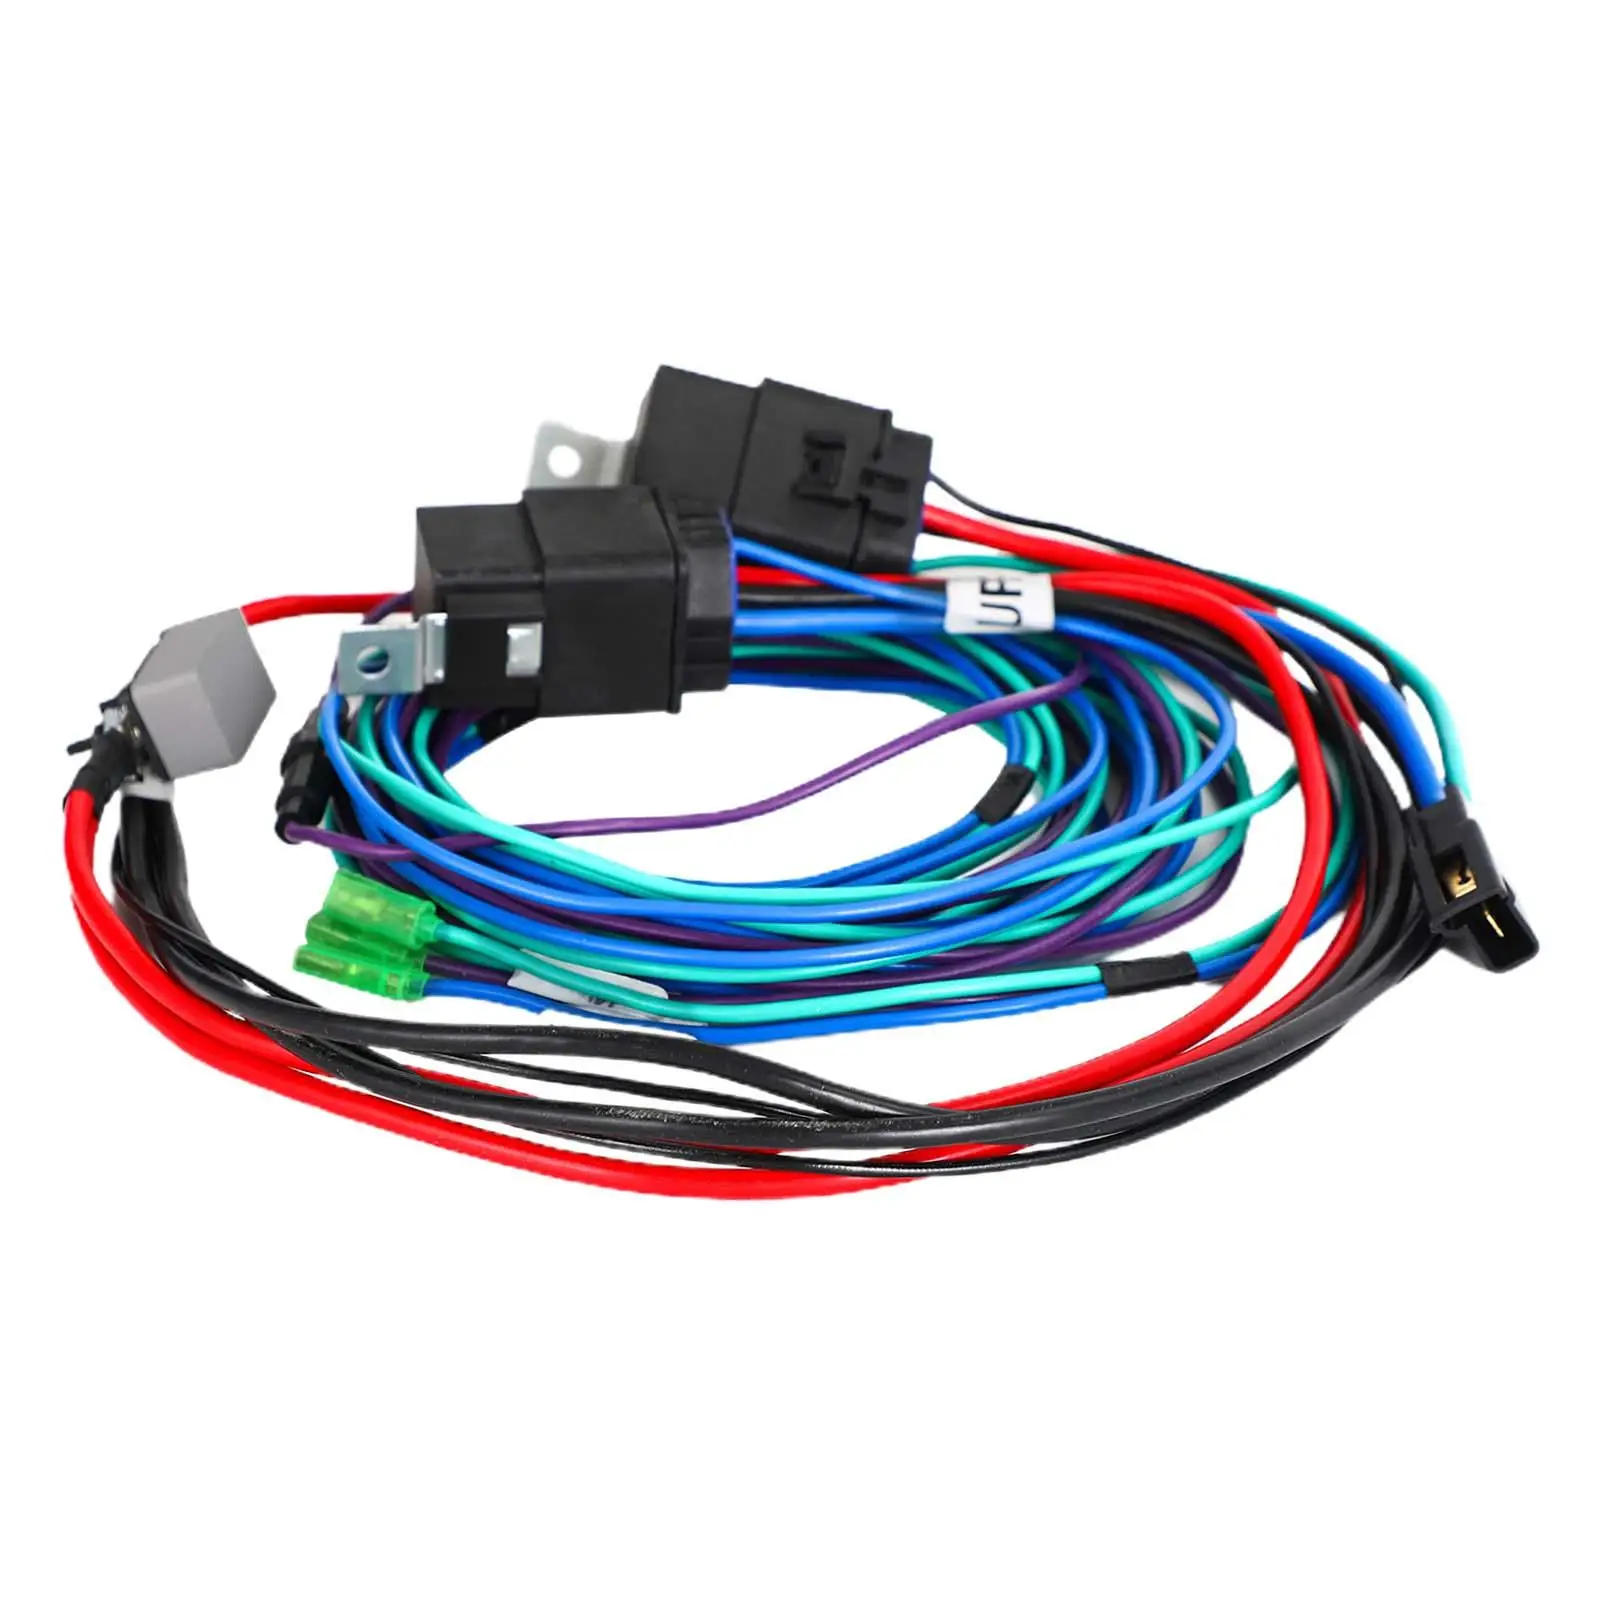 Wiring Cable Harness Kit 7014G Easy Installation Directly Replace for Cmc/Marine Tilt Trim Unit Jack Plate Accessory